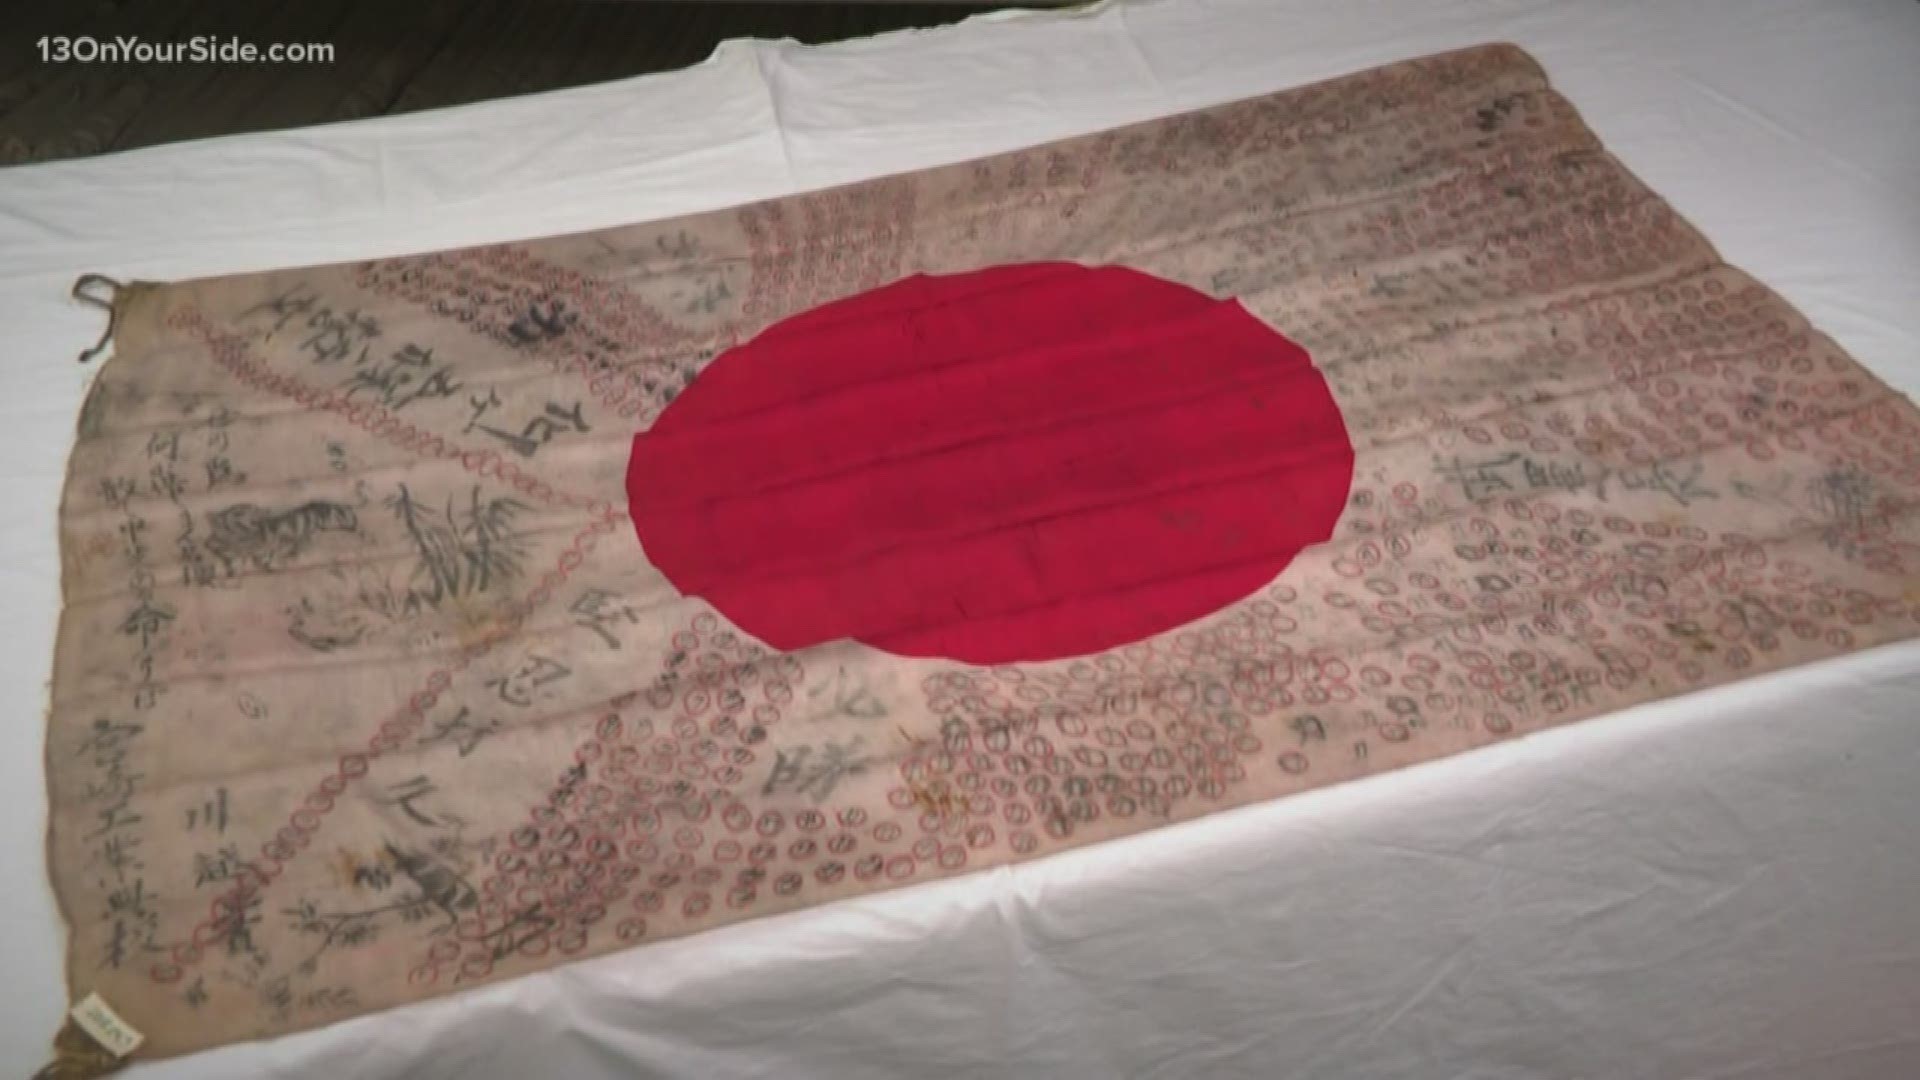 Japanese 'Good Luck Flag' found in West Michigan